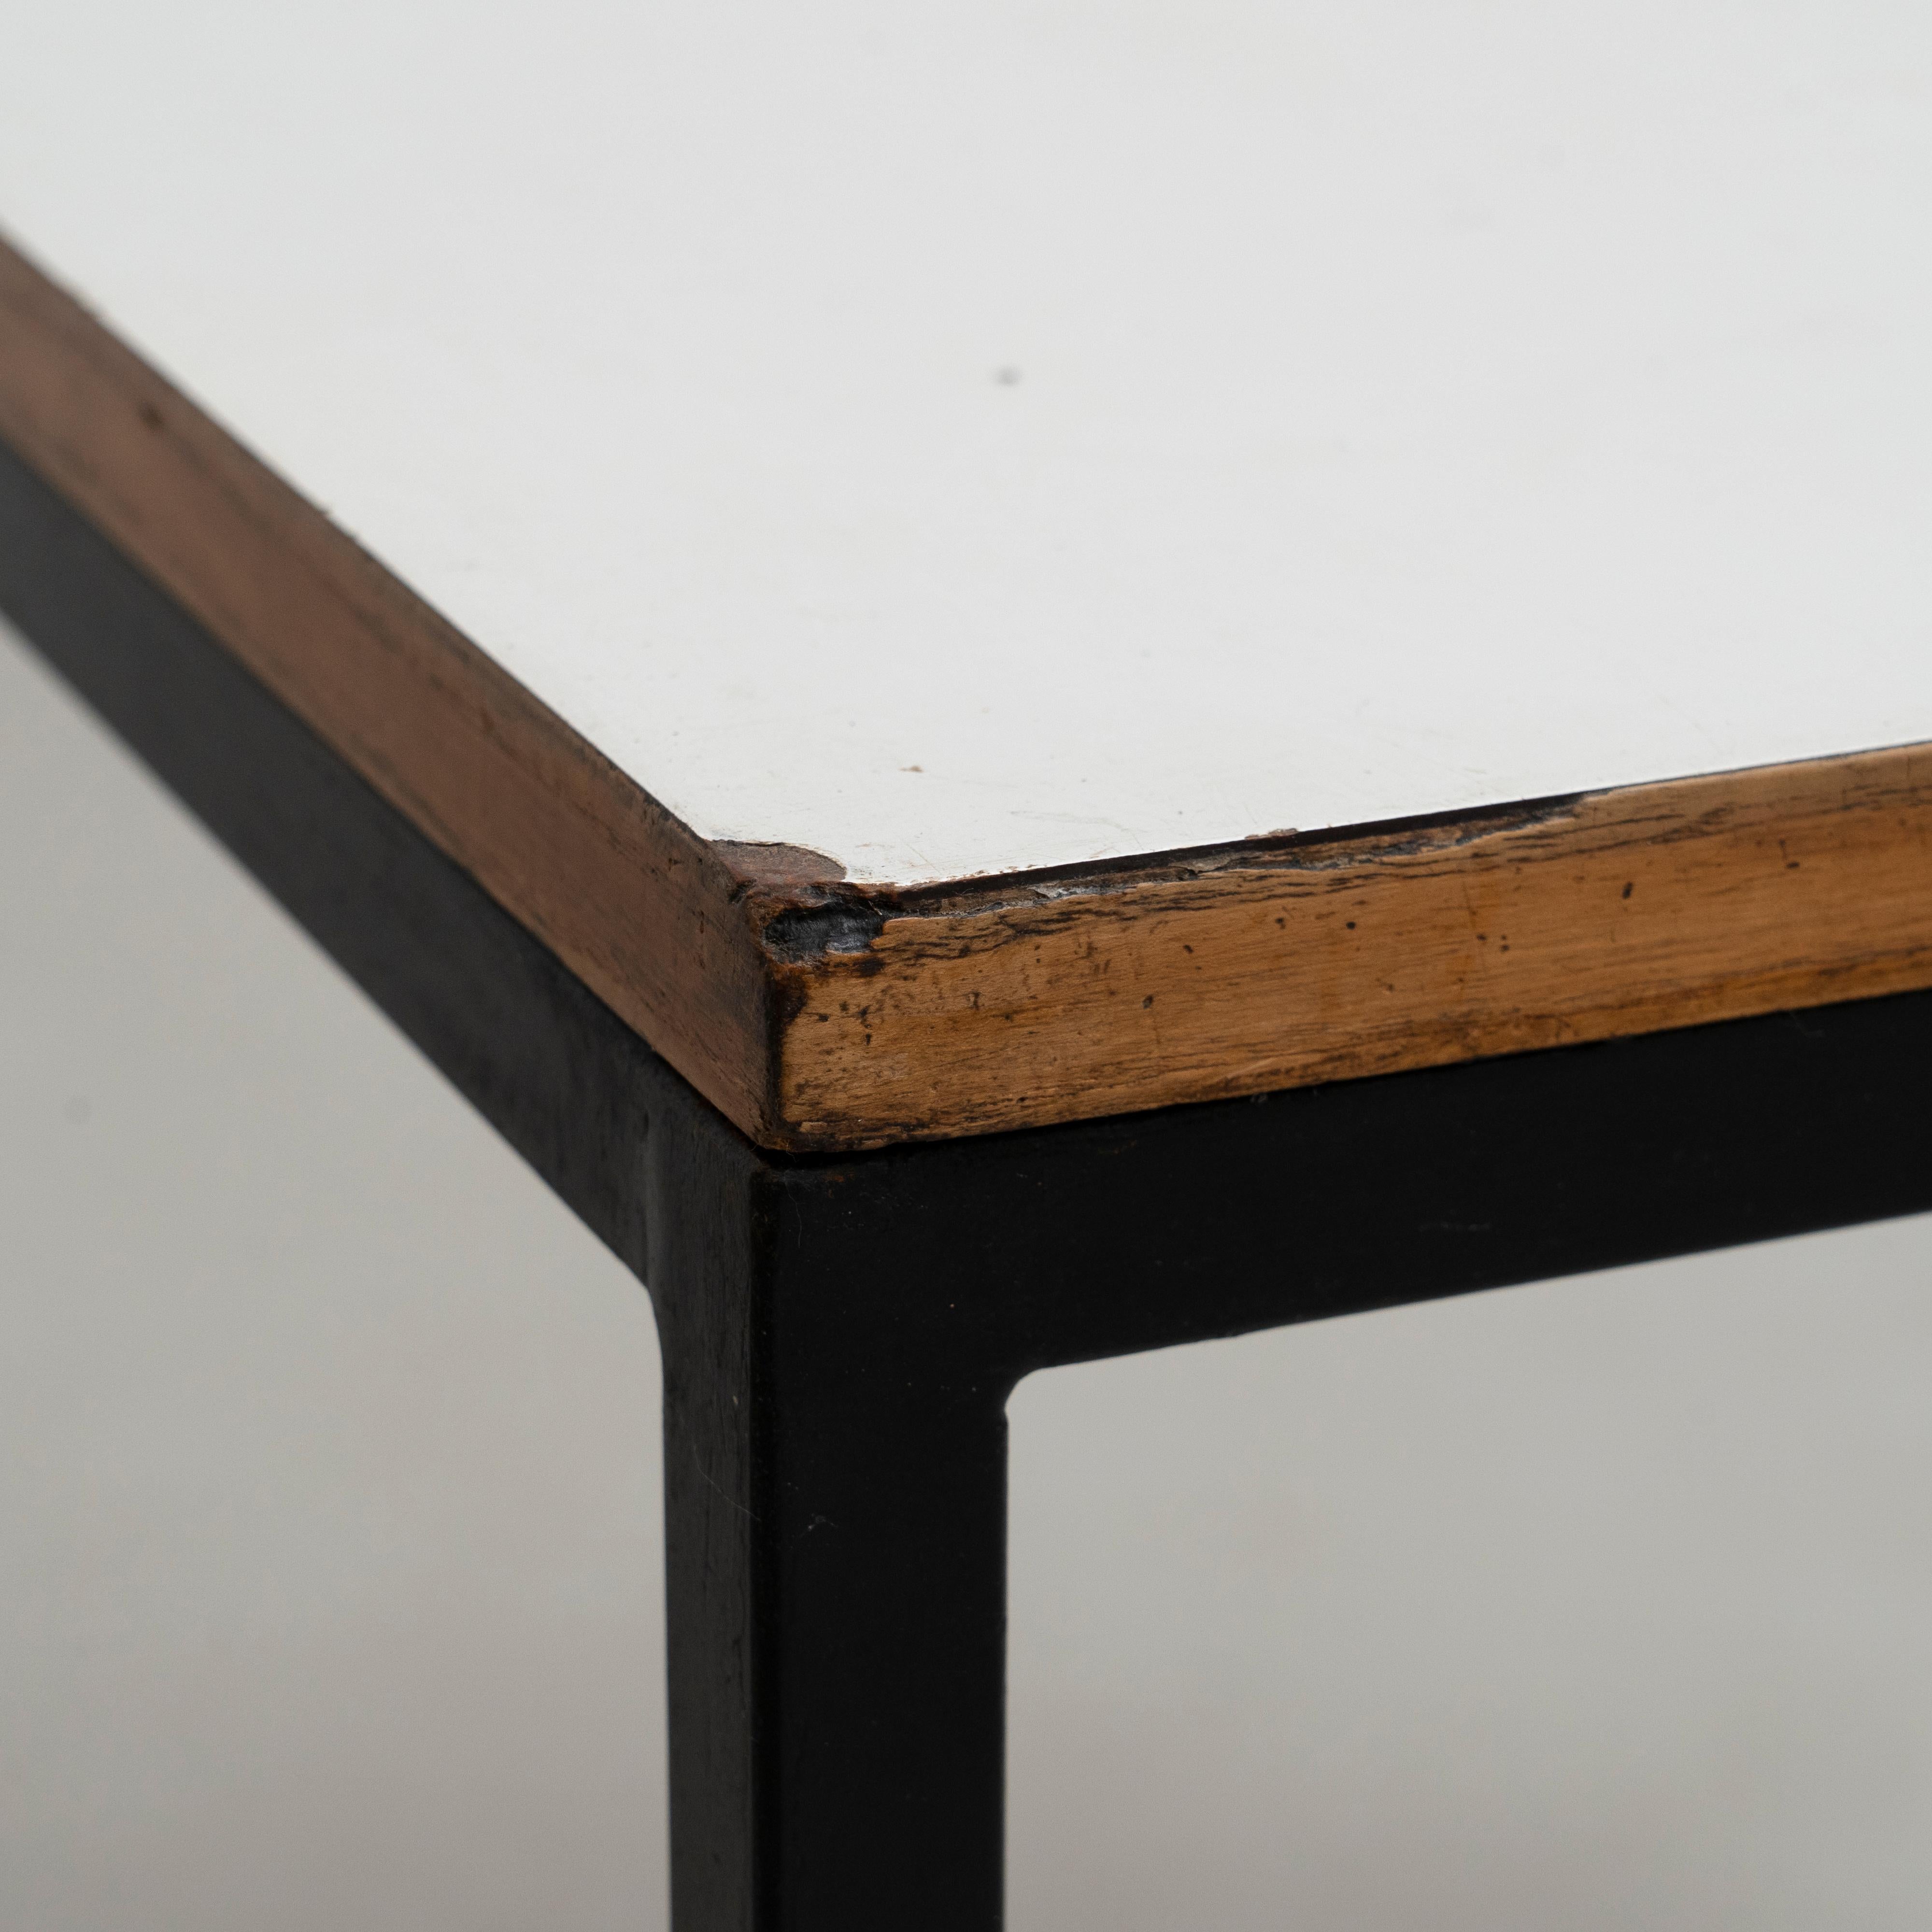 Mid-20th Century Charlotte Perriand Metal, Wood and Formica Table for Cansado, circa 1950